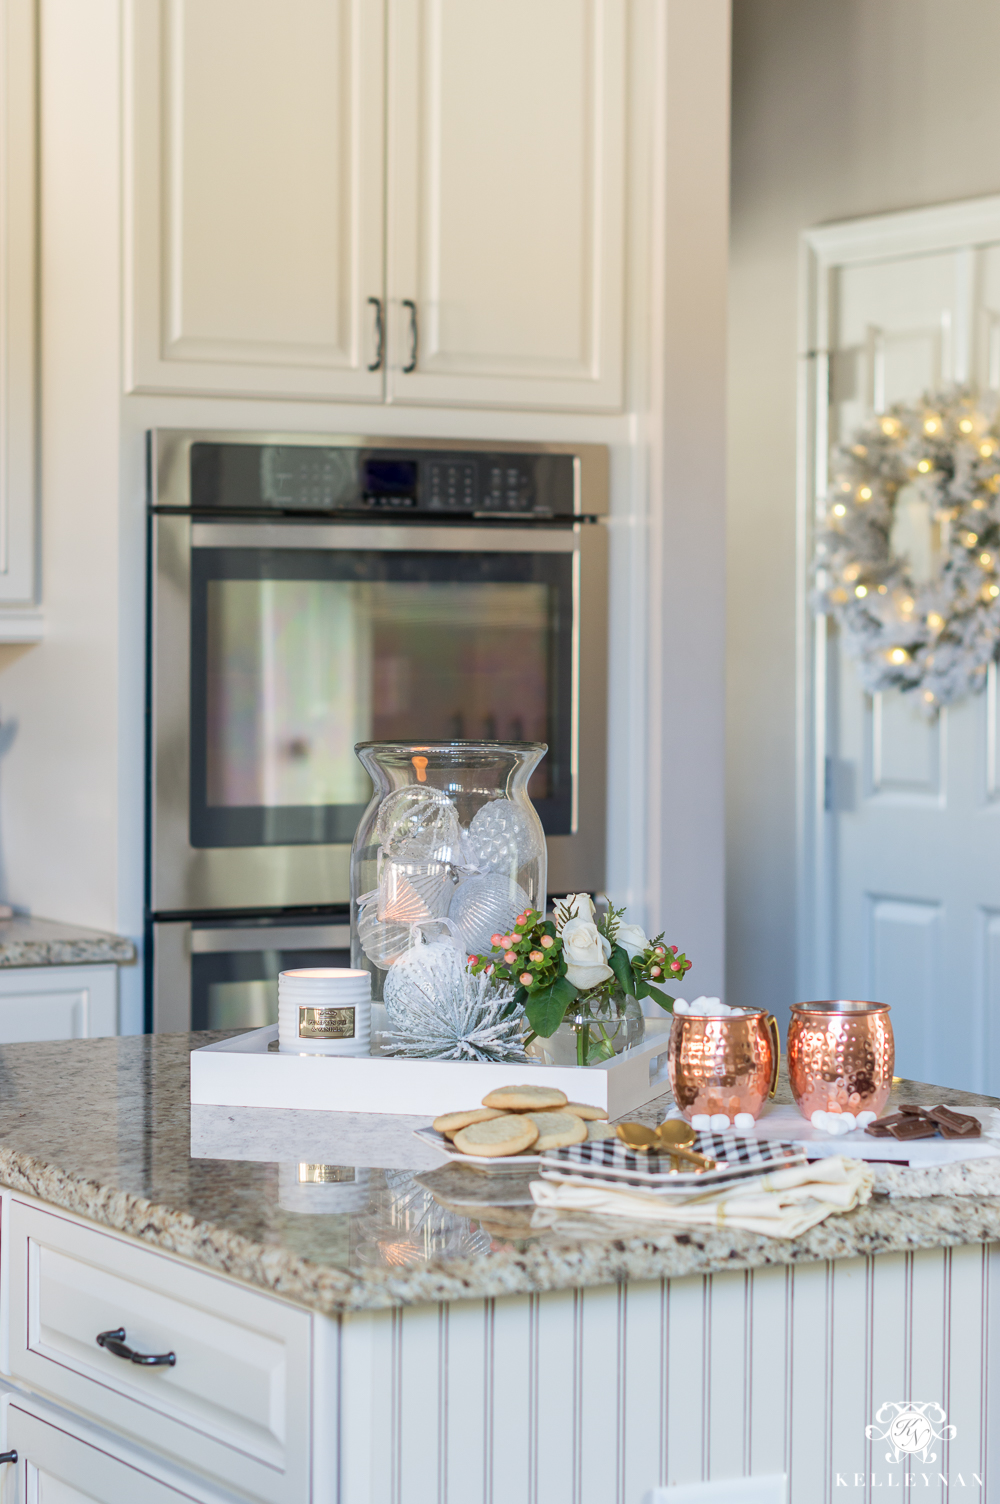 Christmas kitchen decor ideas with copper mugs and treats